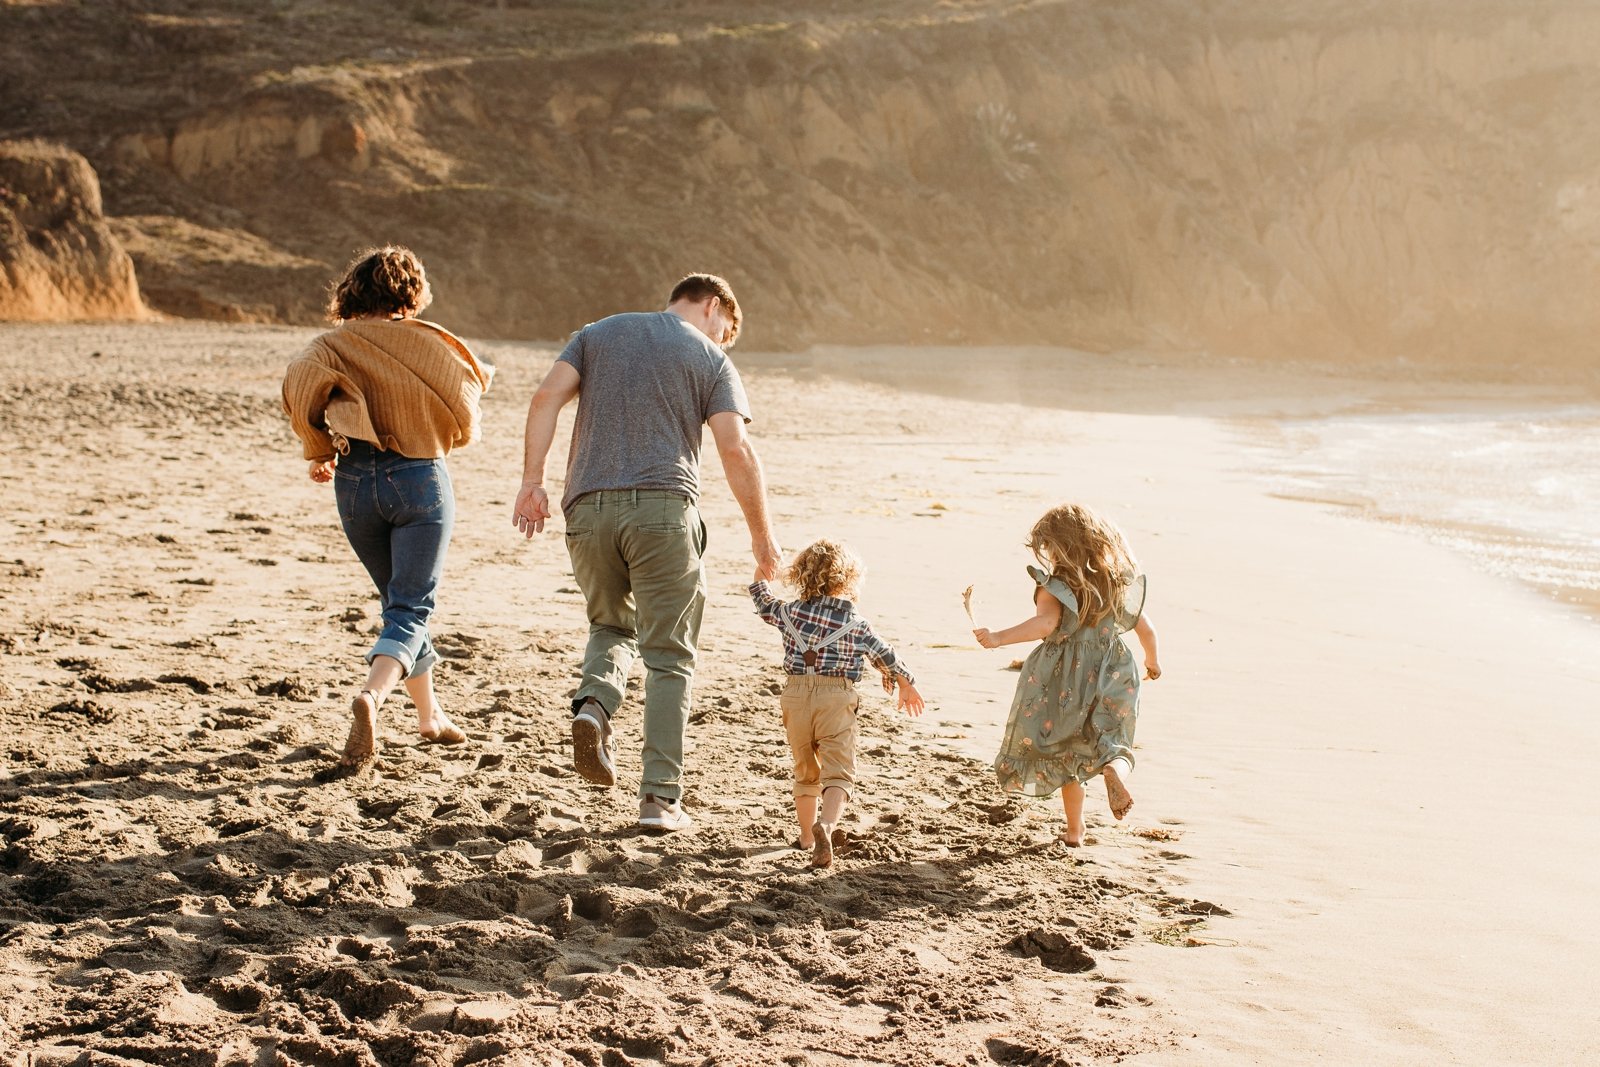 bay area beach photoshoot sunset family lifestyle photographer young soul photography  39.jpg